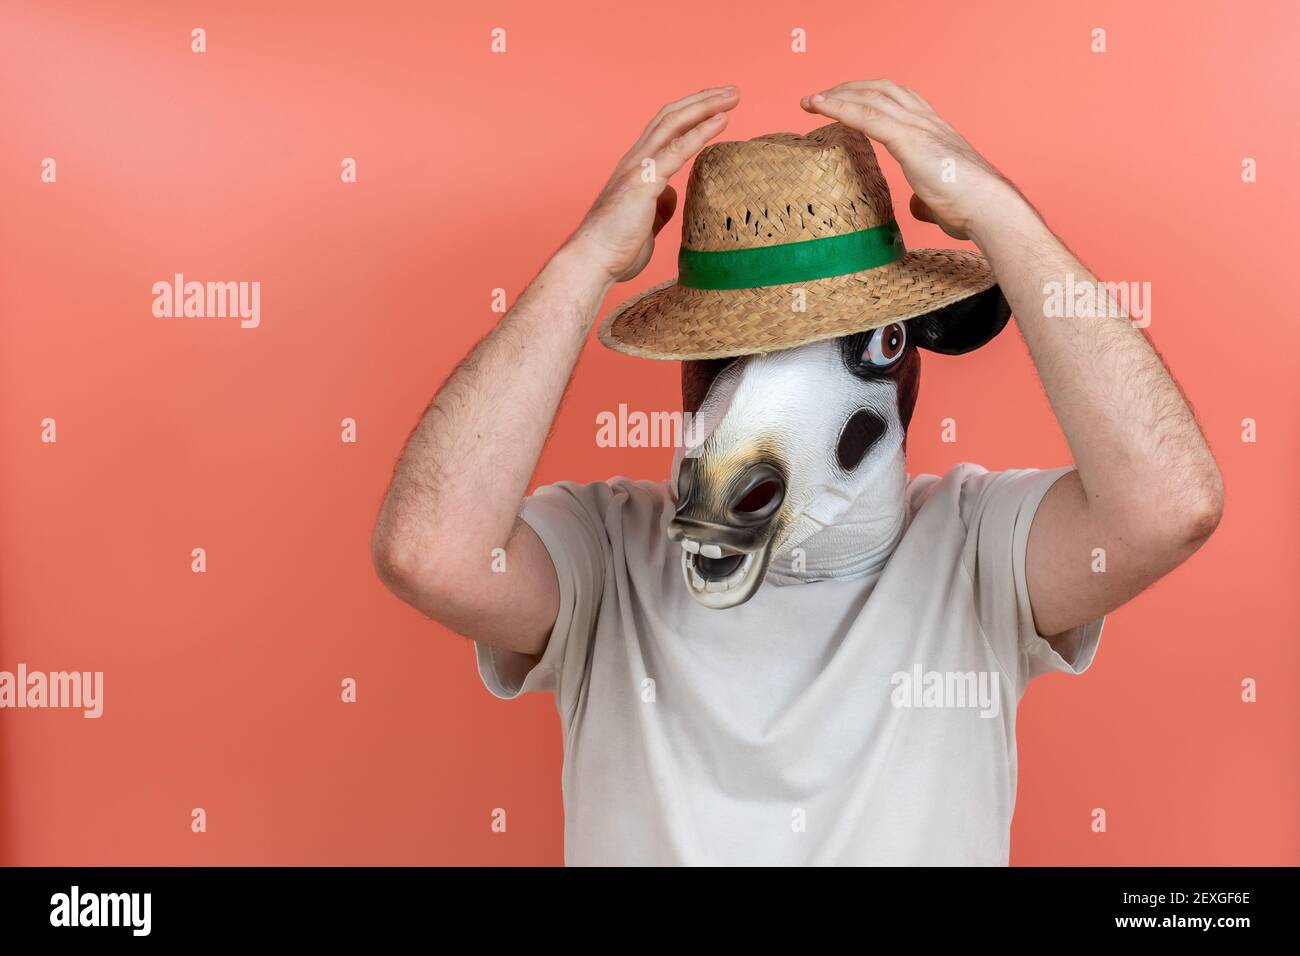 https://c8.alamy.com/comp/2EXGF6E/person-disguised-as-a-cow-and-wearing-a-white-t-shirt-with-a-straw-hat-on-his-or-her-head-on-a-pink-background-2EXGF6E.jpg